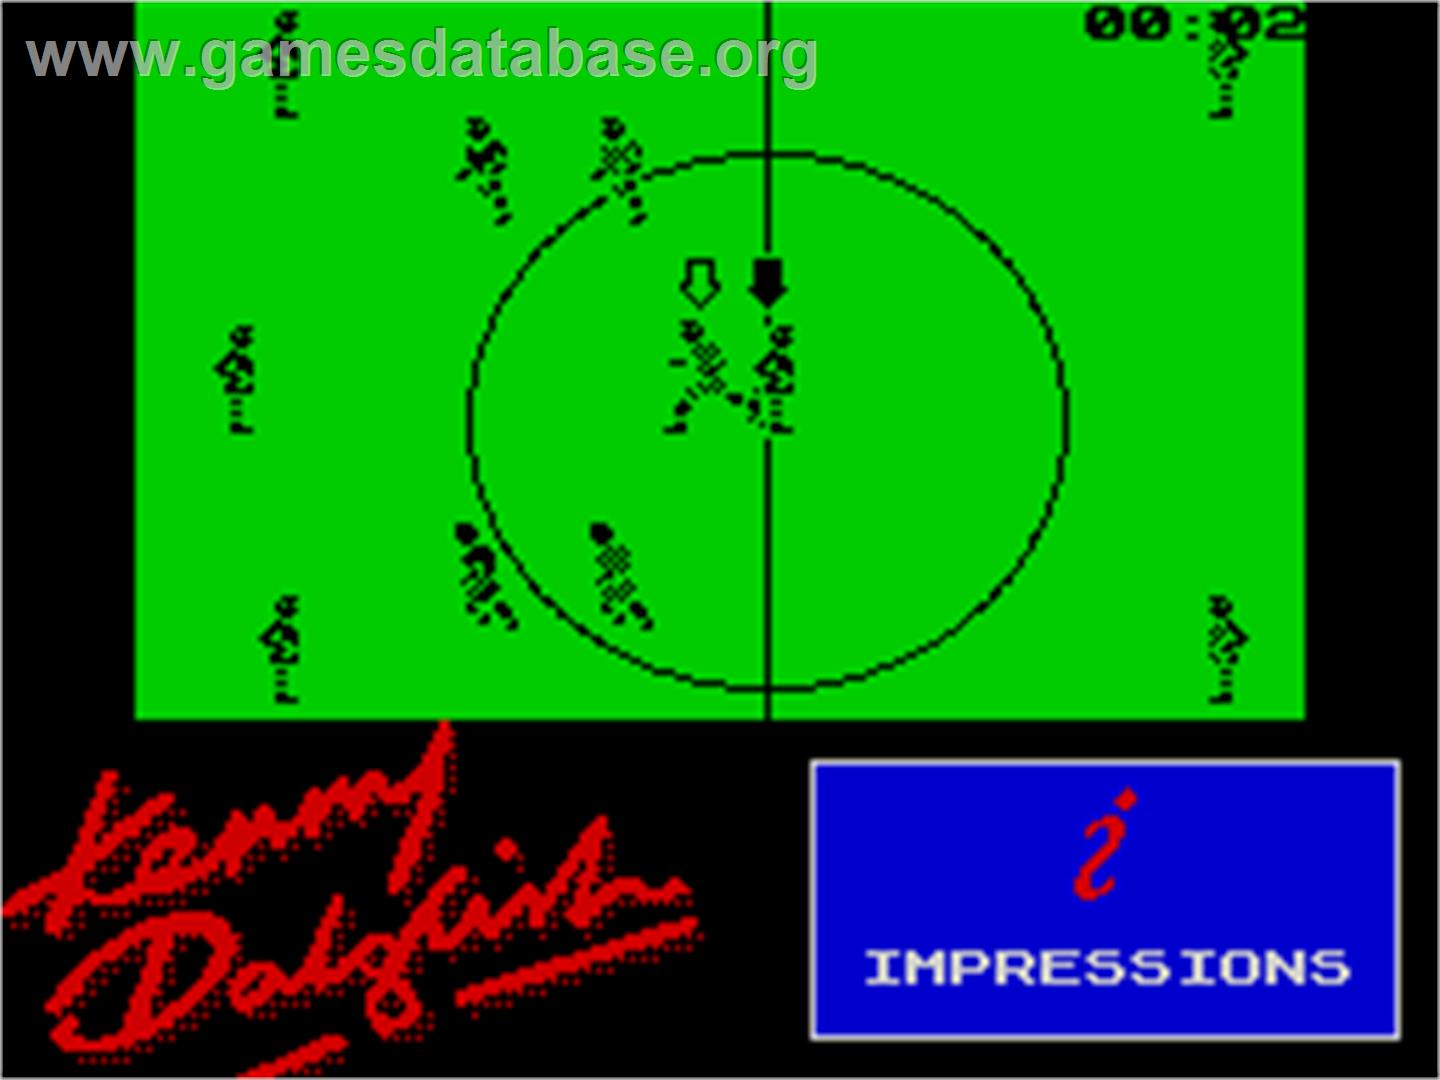 Kenny Dalglish Soccer Match - Sinclair ZX Spectrum - Artwork - In Game